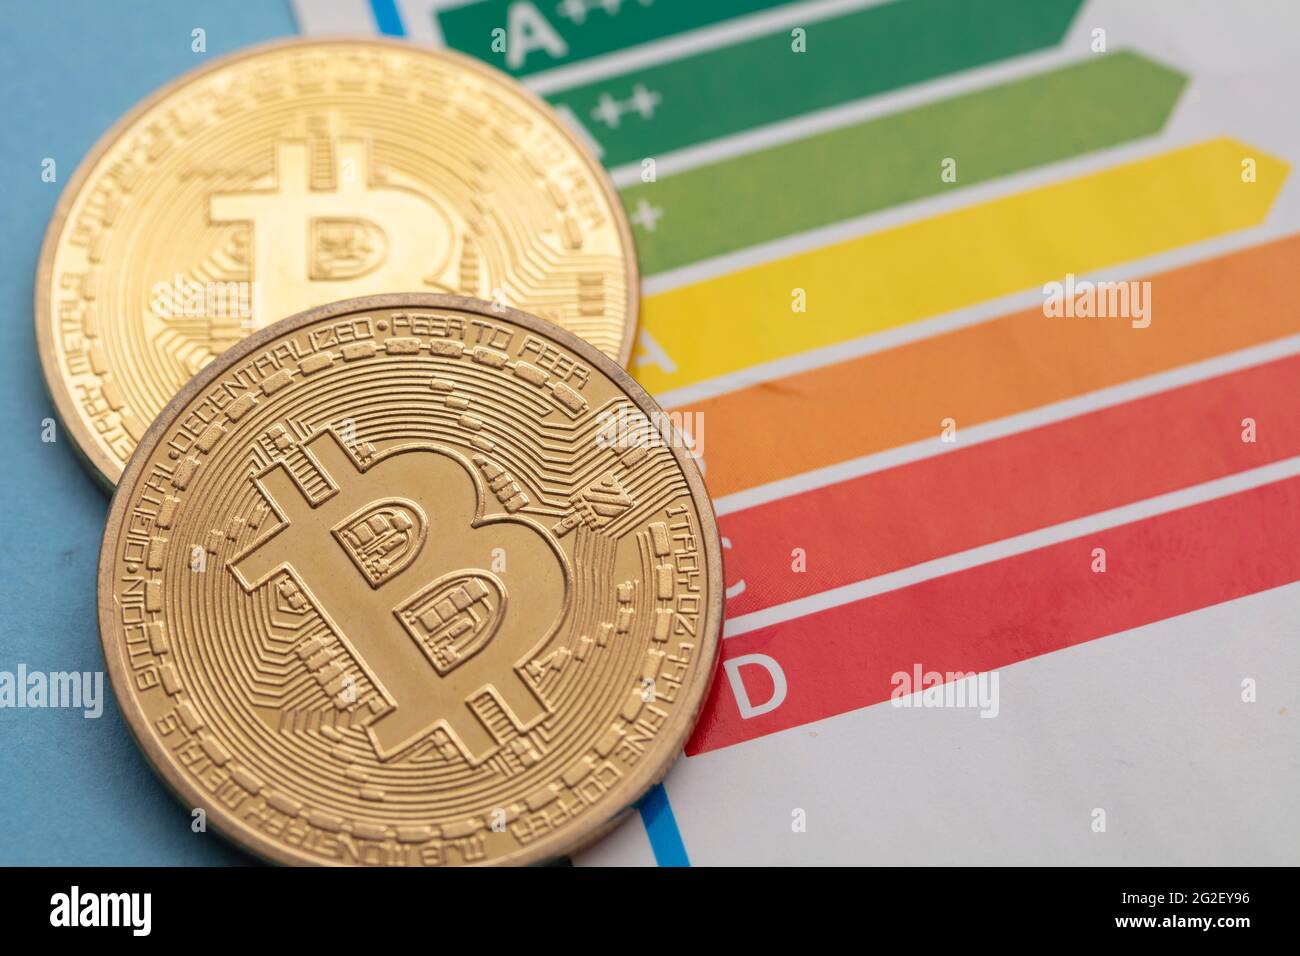 Bitcoin cryptocurrency gold coin with an energy efficiency rating chart Stock Photo